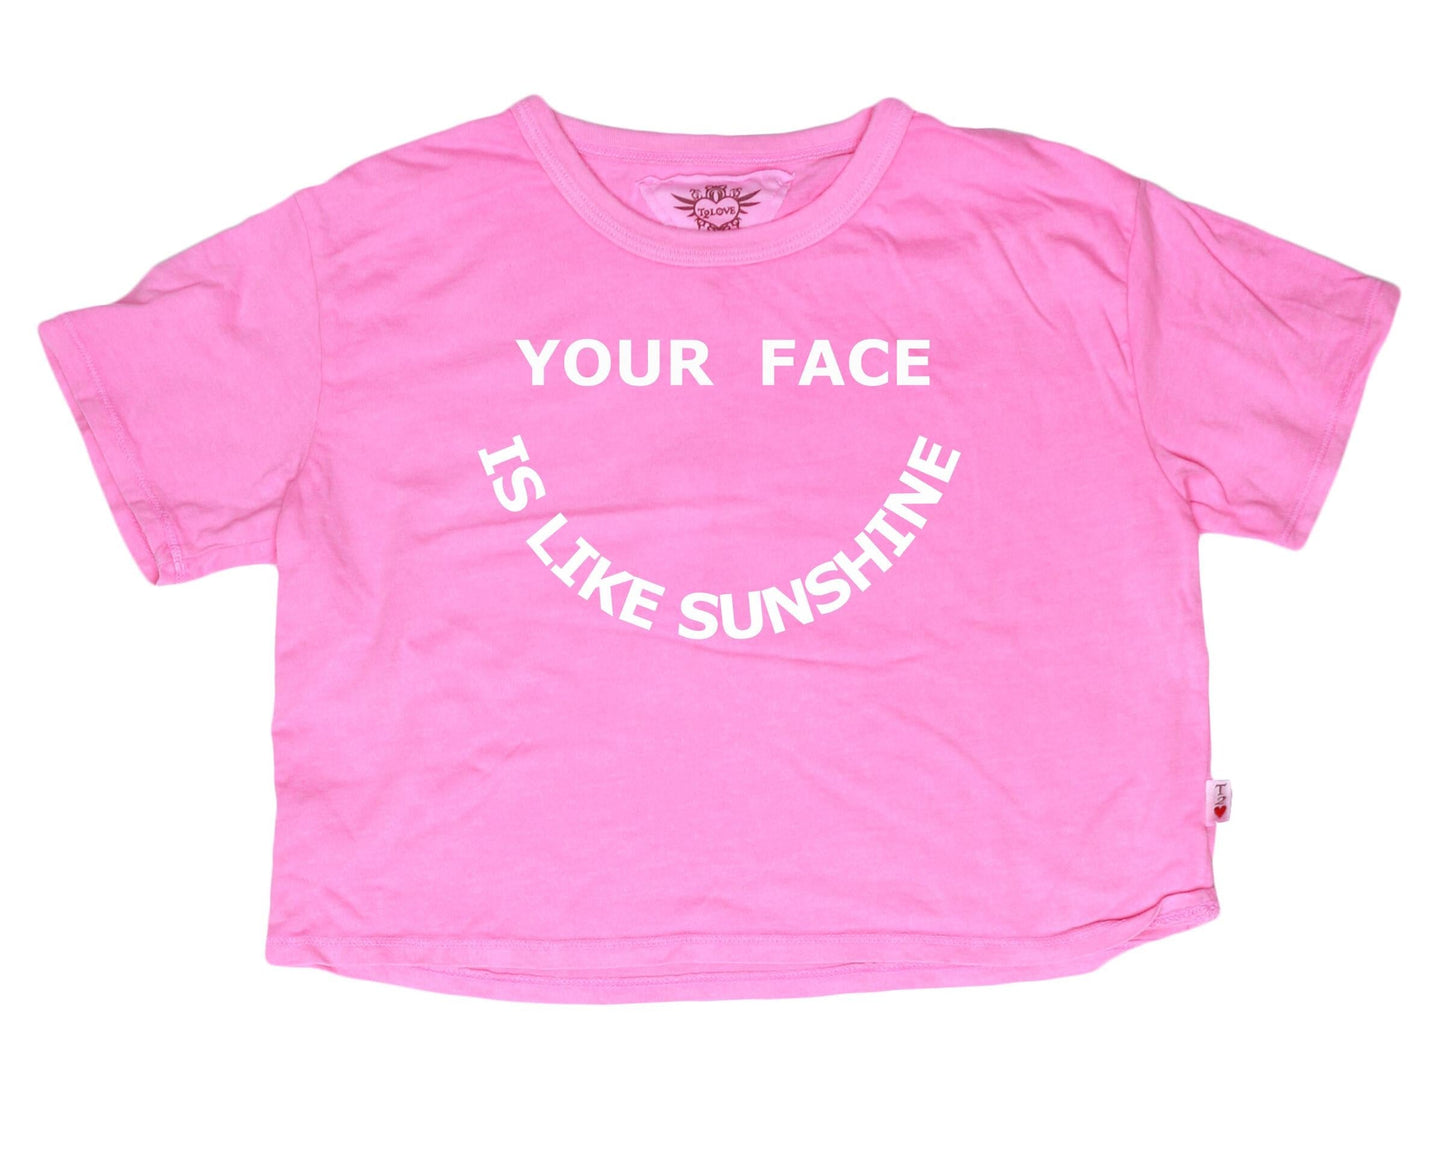 "YOUR FACE IS LIKE SUNSHINE" Boxy Tee